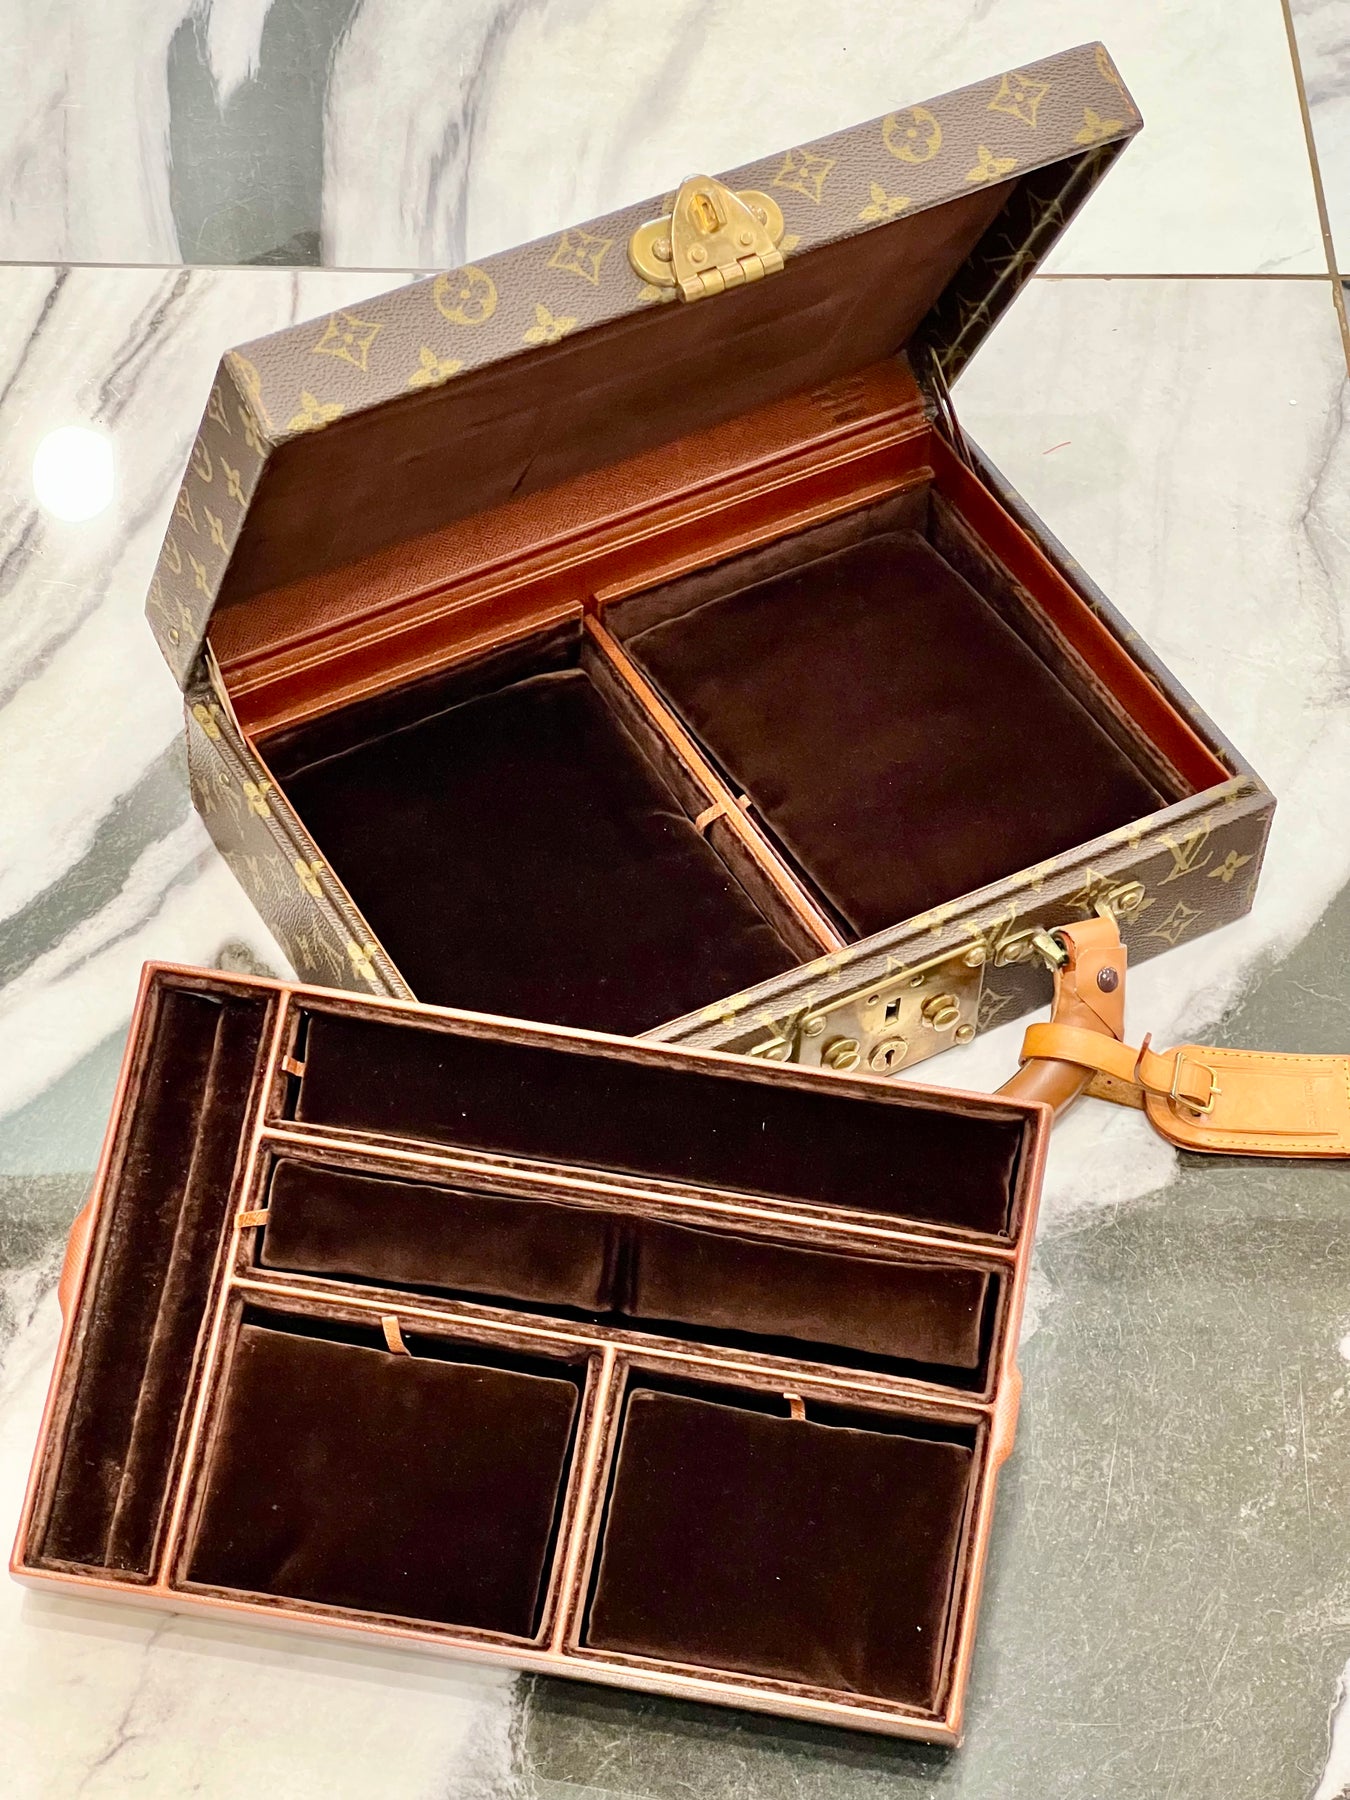 Authenticated Used Louis Vuitton Monogram Trunk Jewelry Box Case